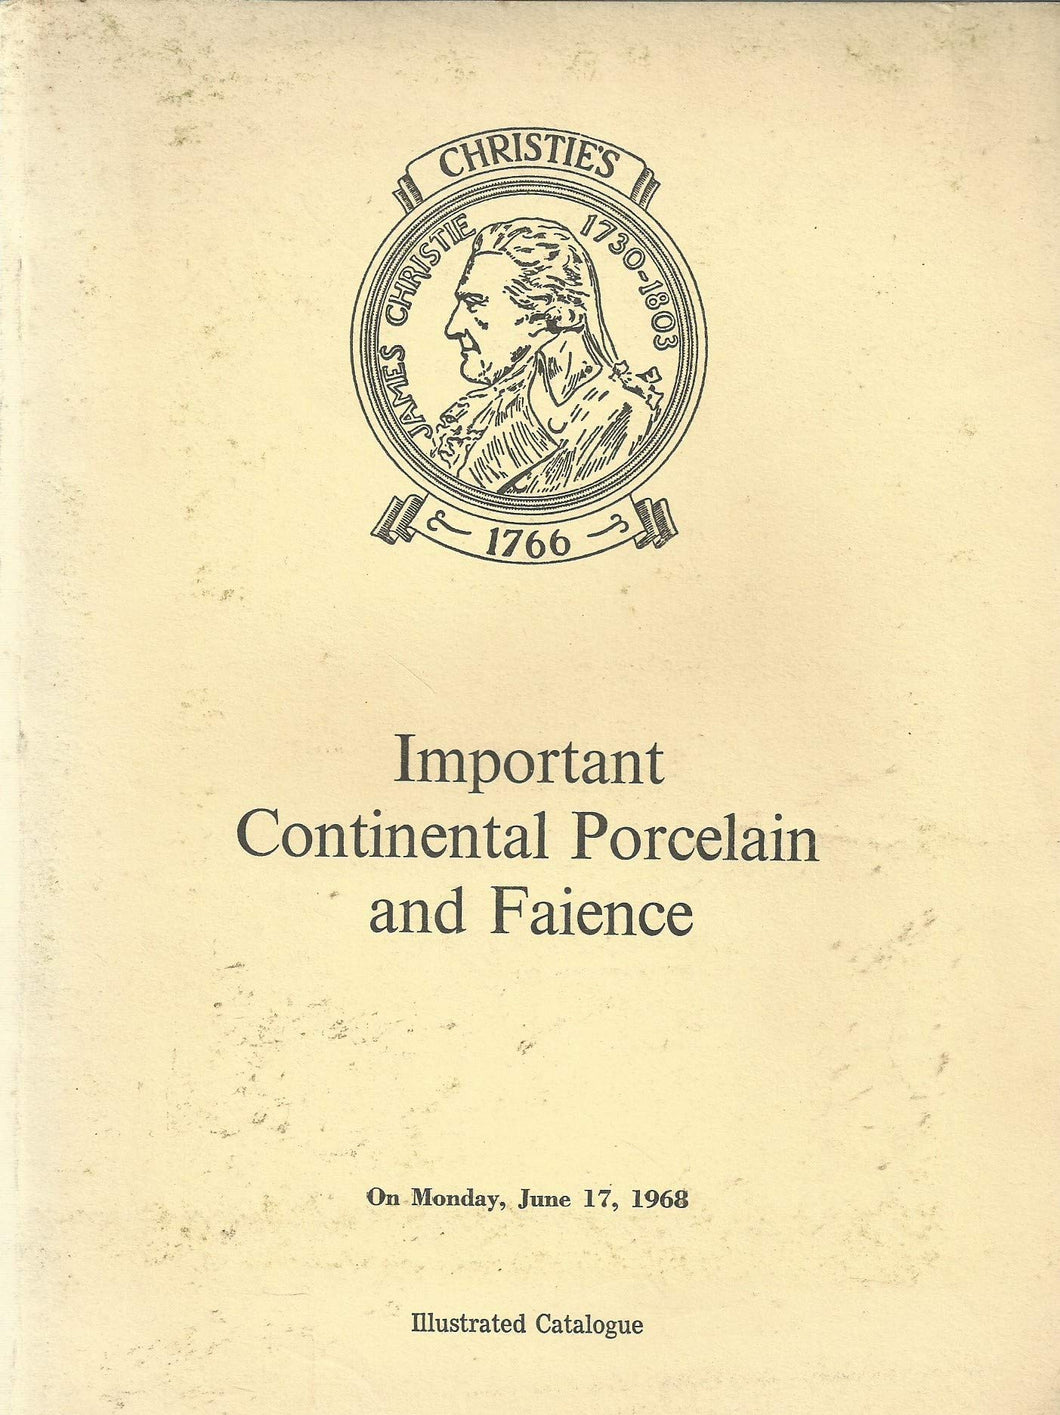 Christie's Illustrated Catalogue: Important Continental Porcelain and Faience on Monday, June 17, 1968